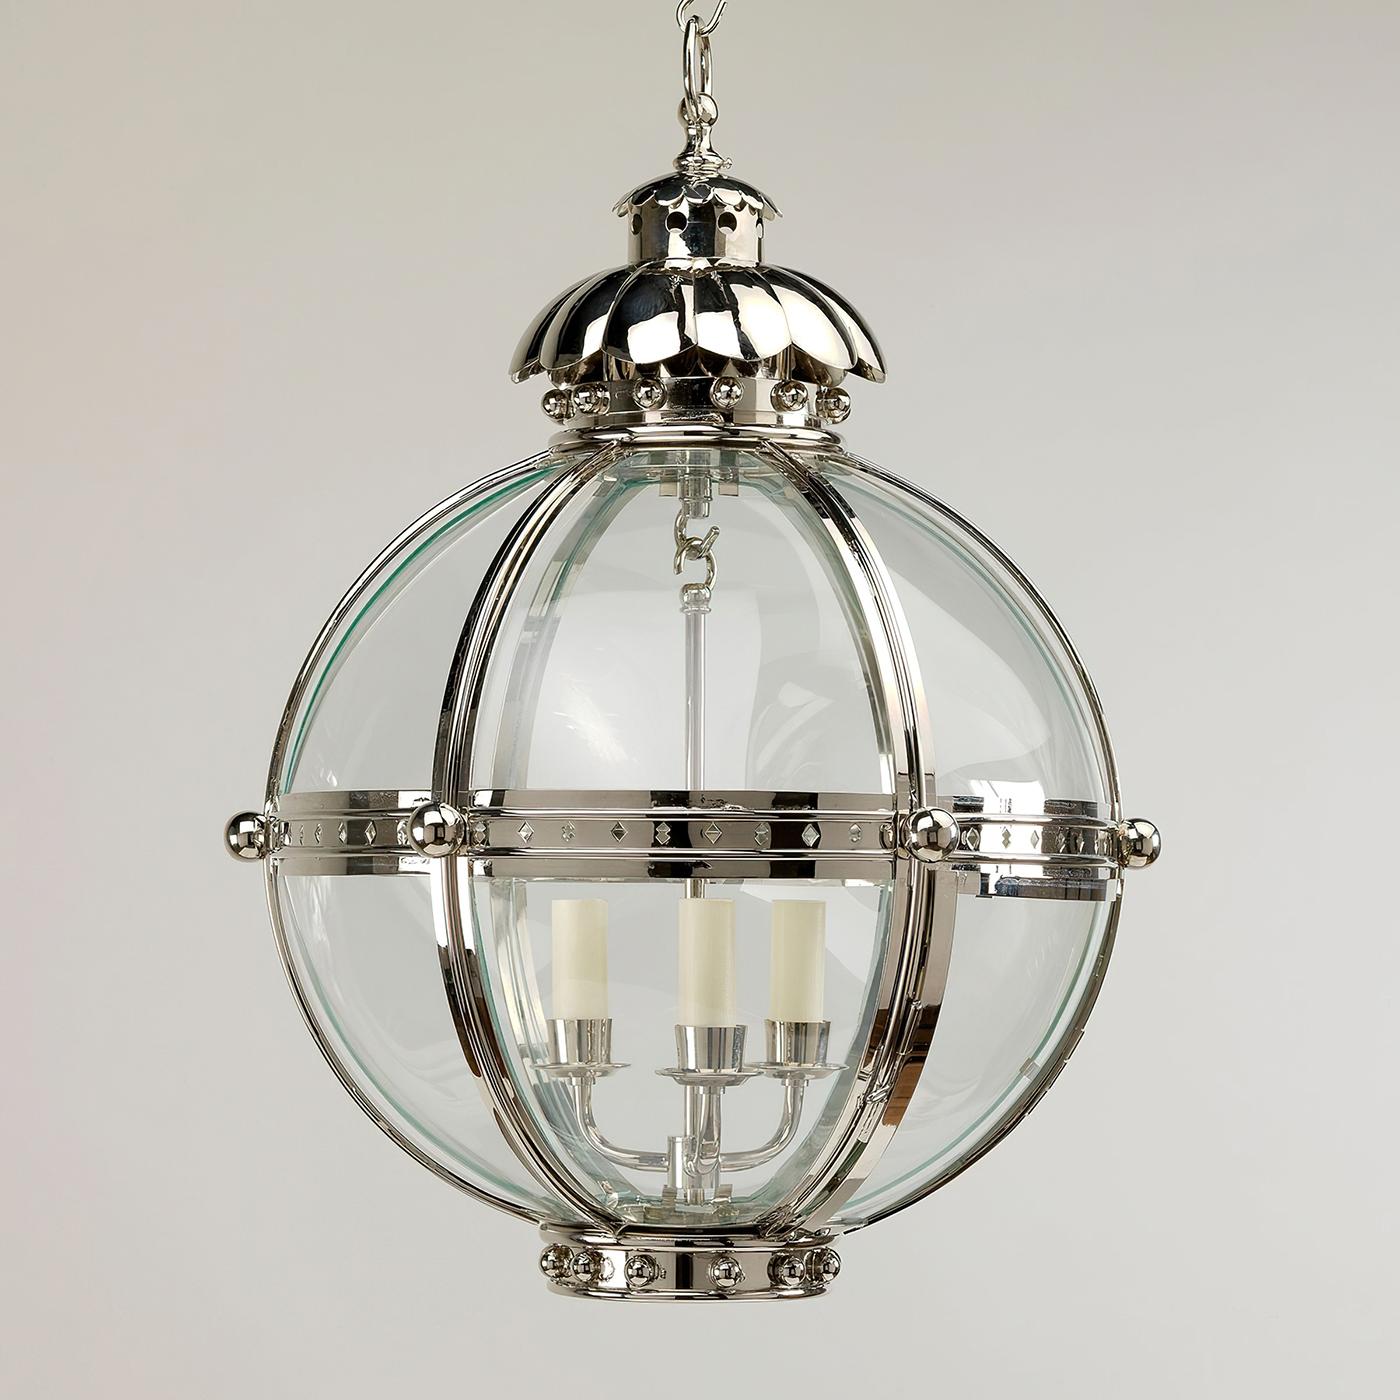 The Globe Lantern is based on a similar 19th-century antique. The globe shape of the fixture emanates strength and is united by the nickel finish finials and acanthus top.

The lantern is hand-fabricated from brass and curved glass panels. The